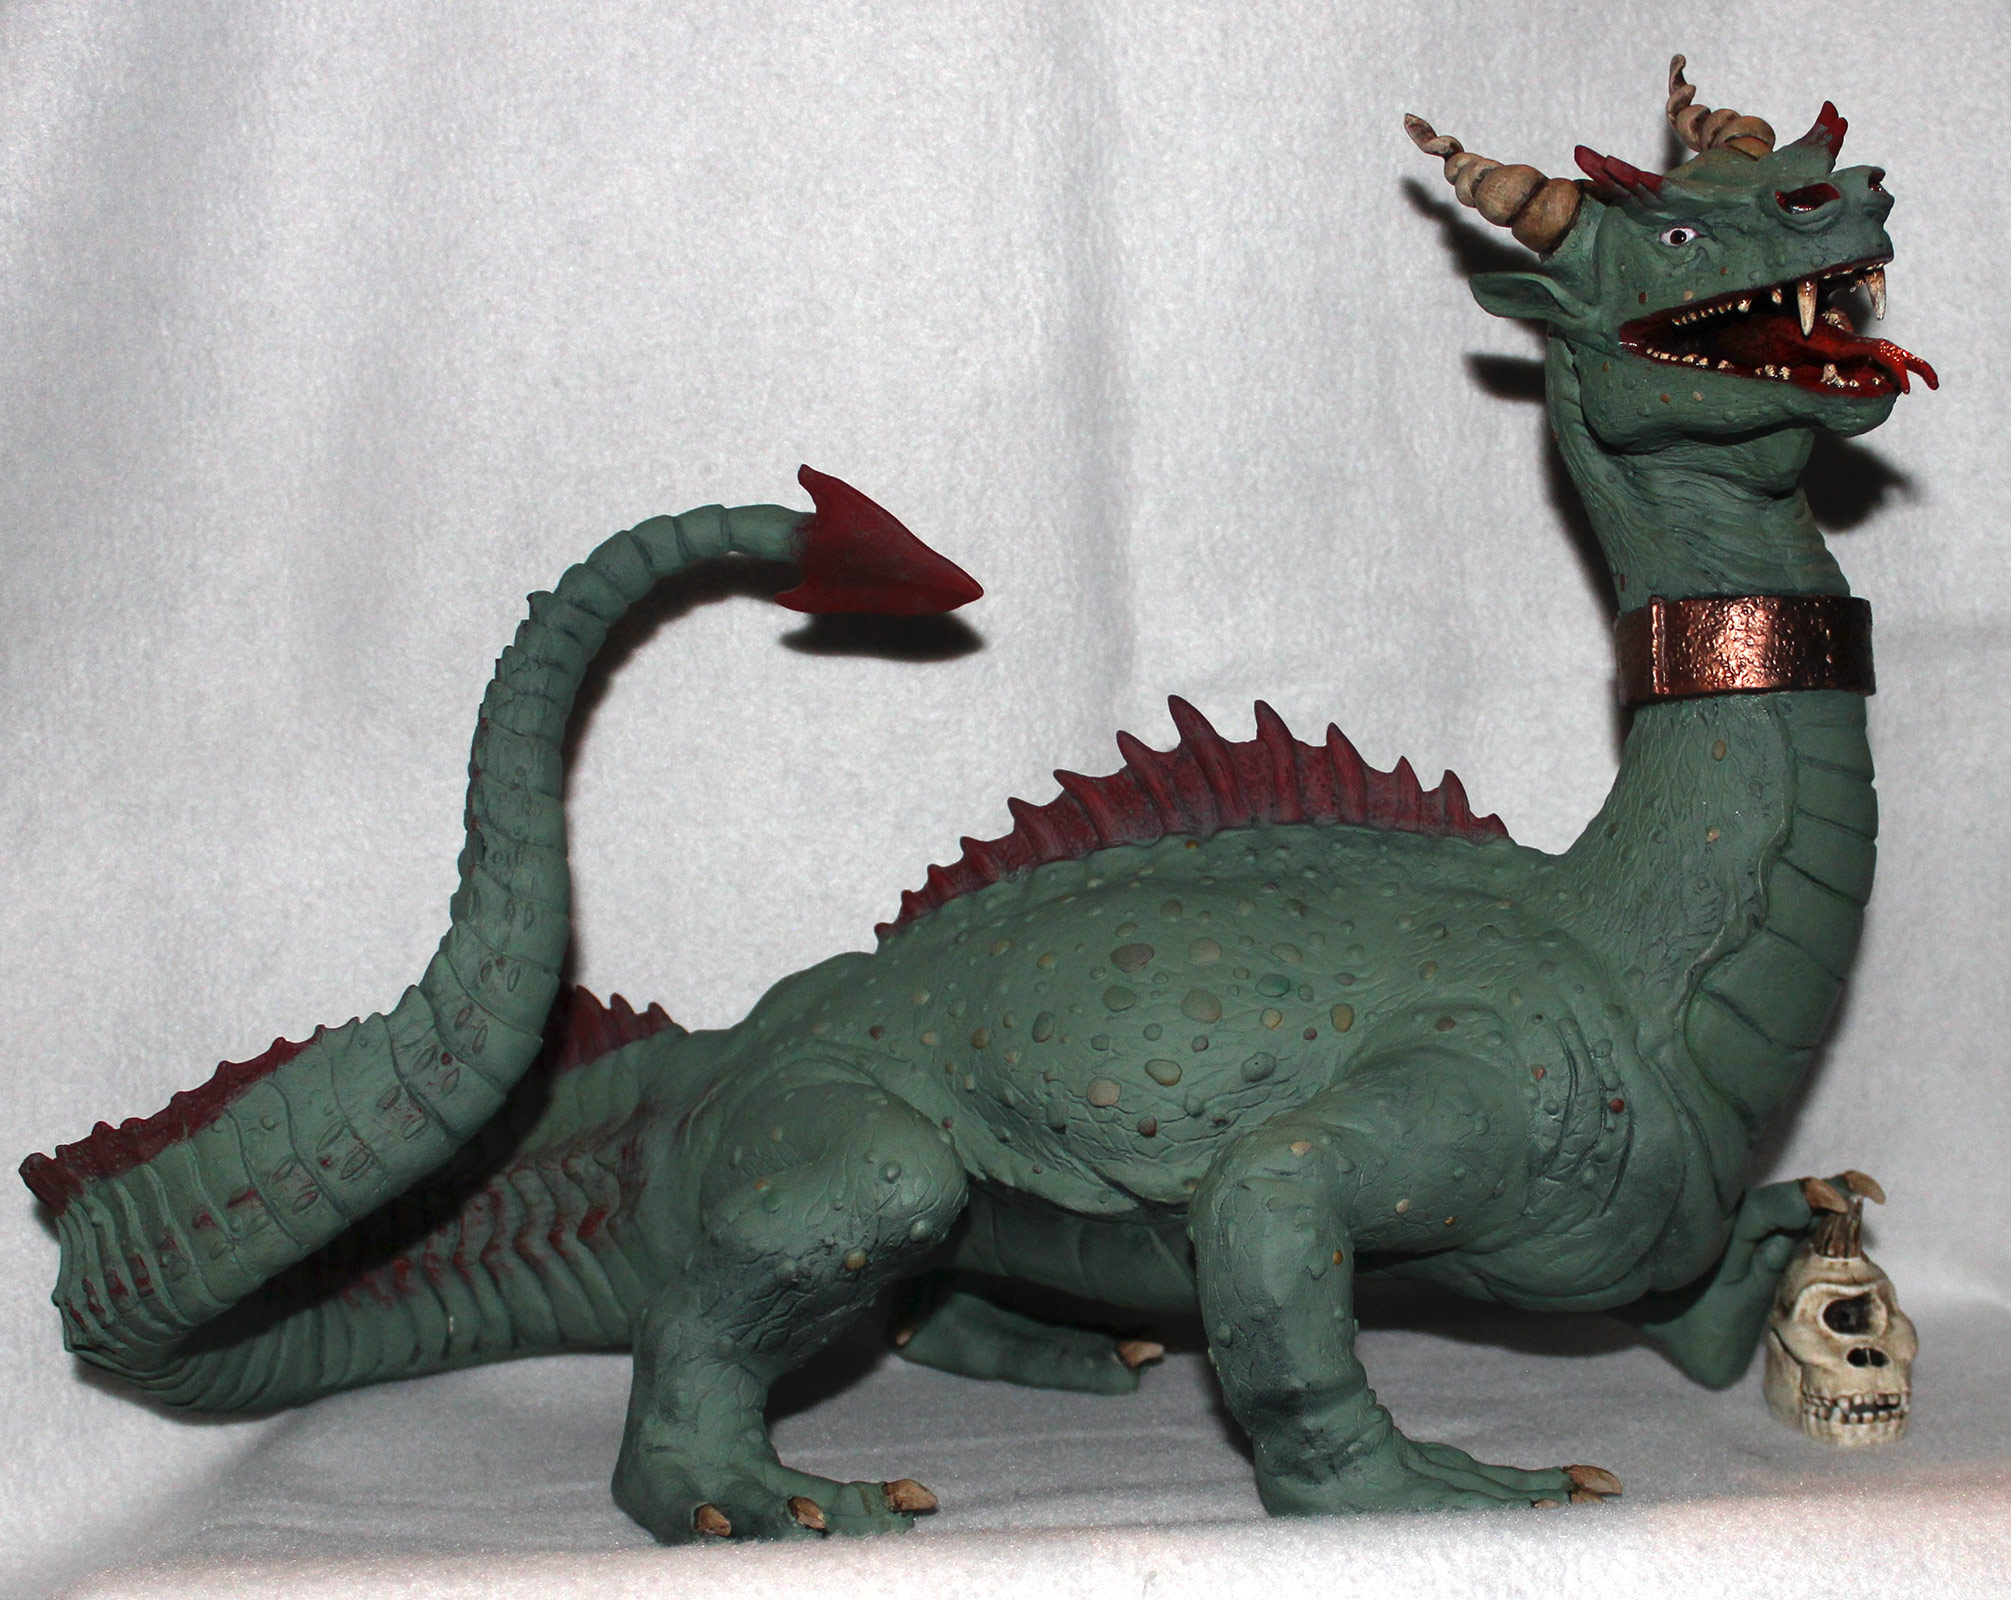 Dragon from 7th Voyage of Sinbad (1958) - The Doctor's Model Mansion